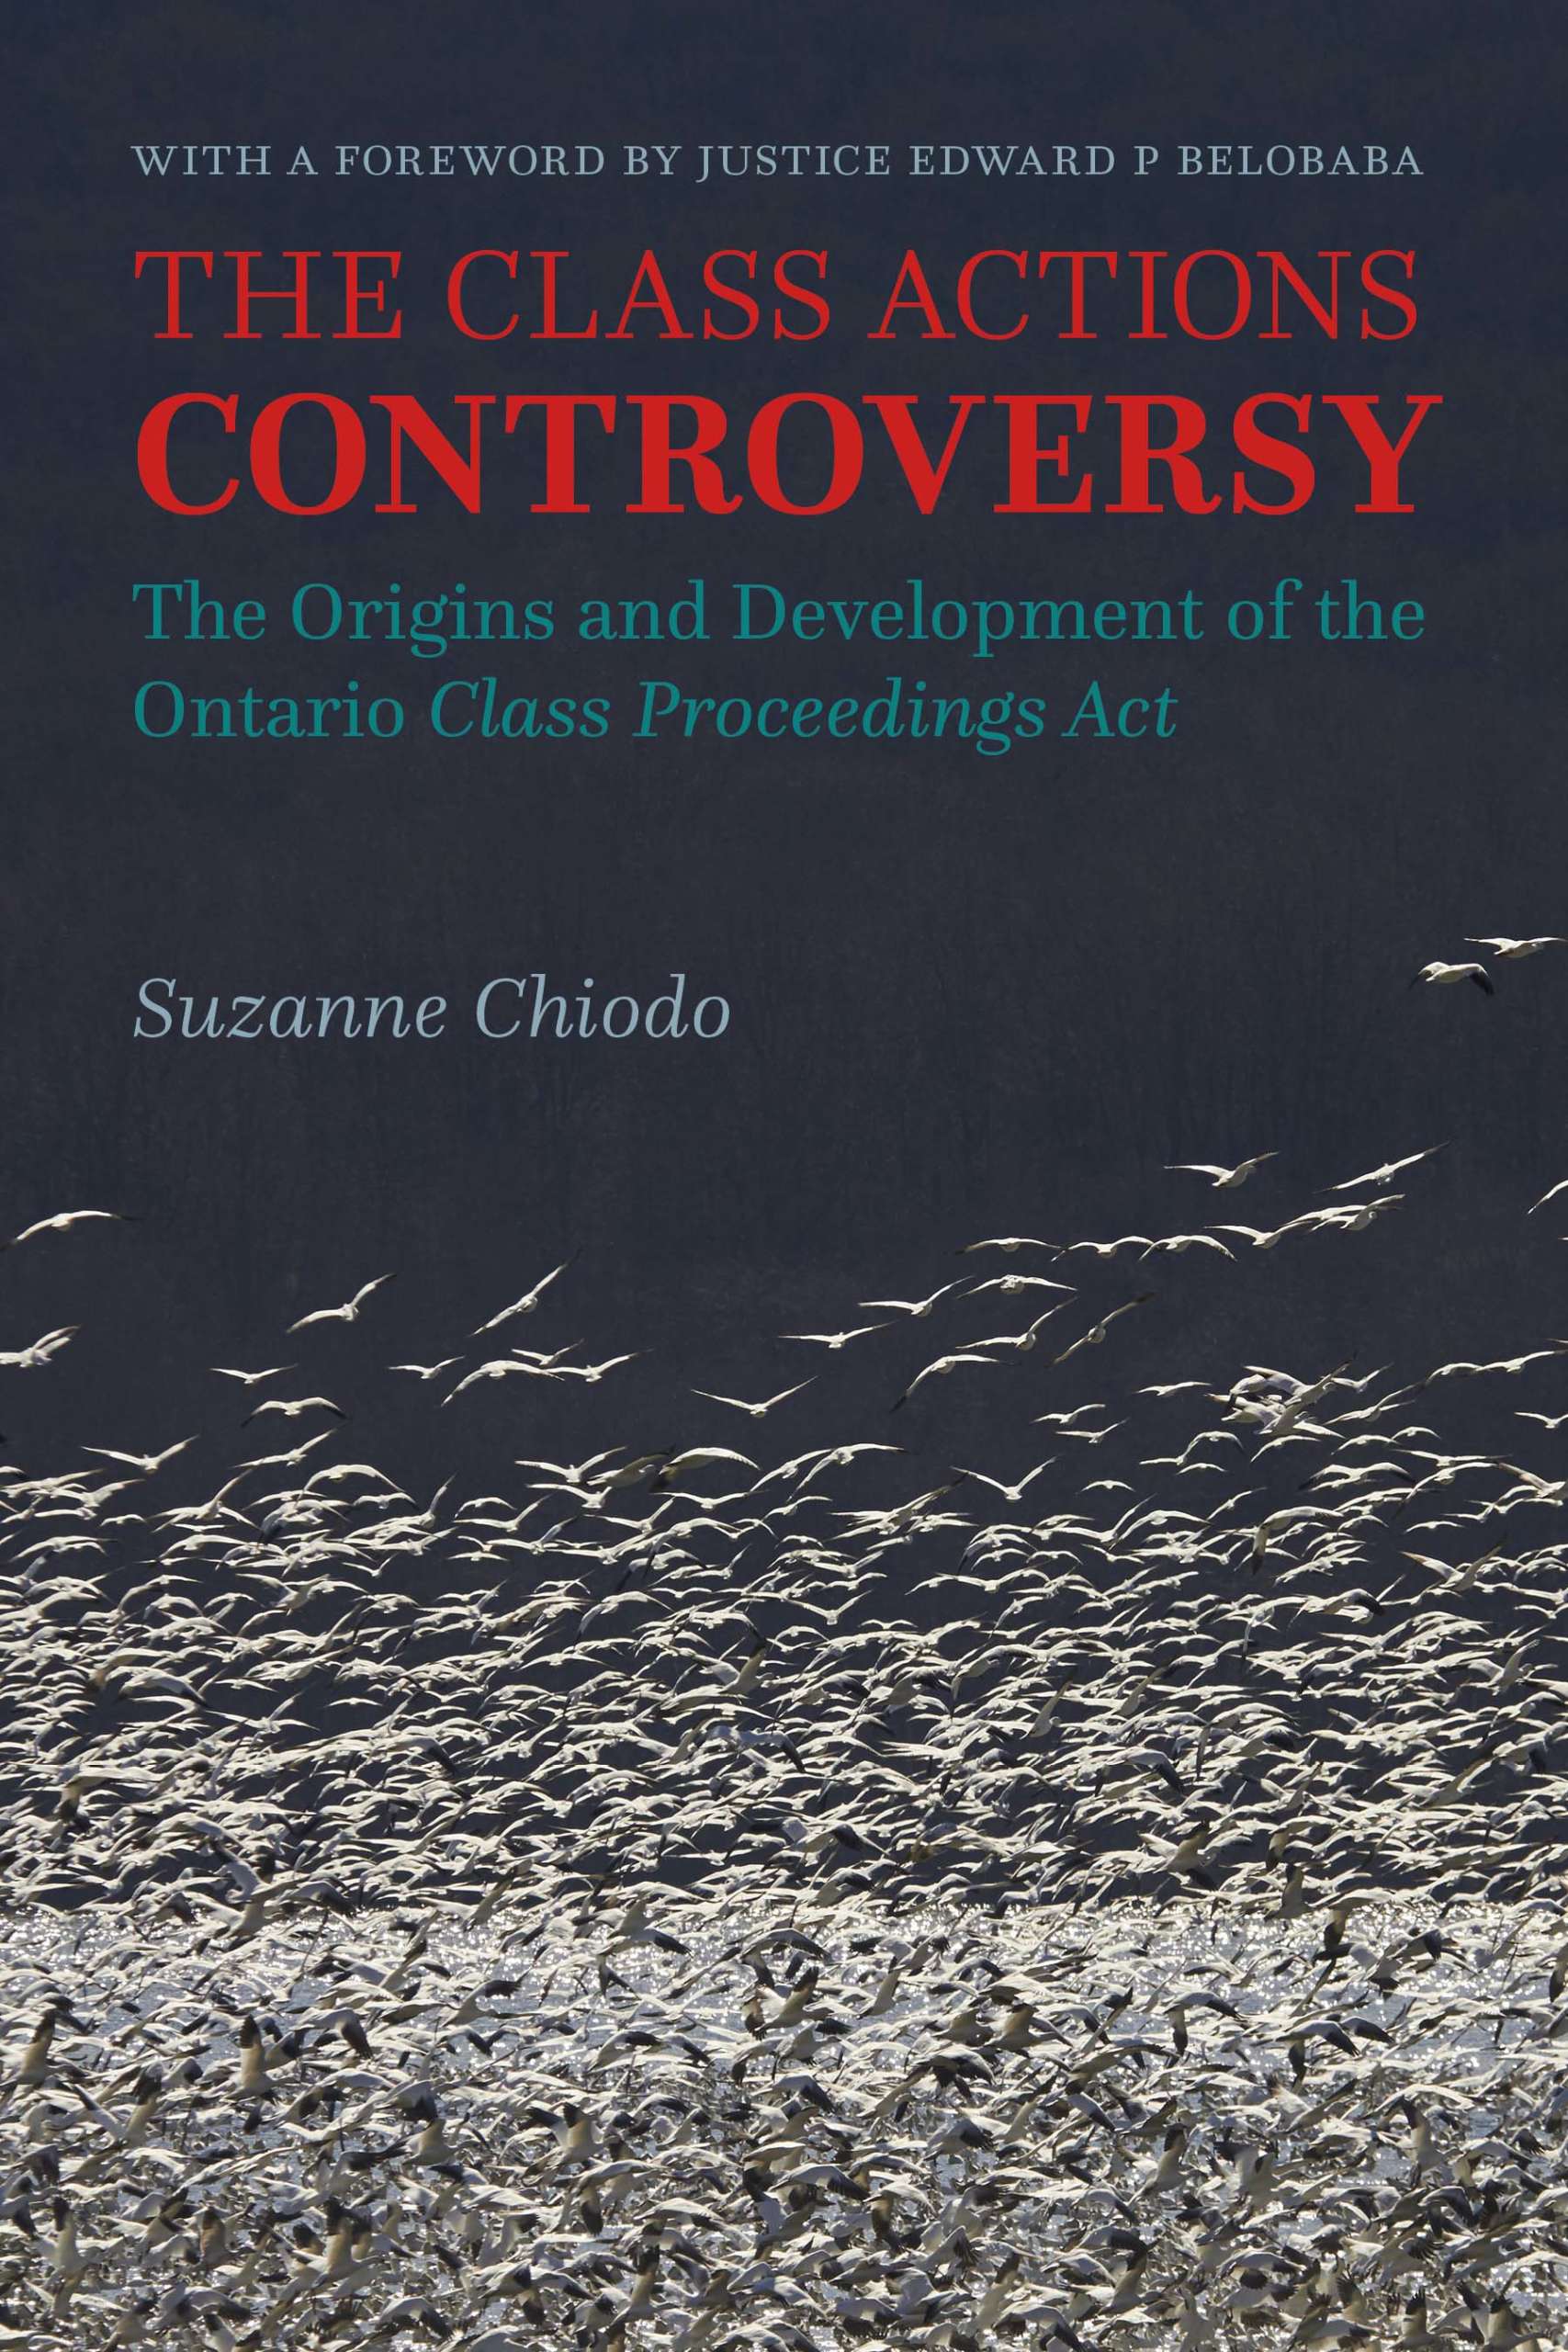 The Class Actions Controversy